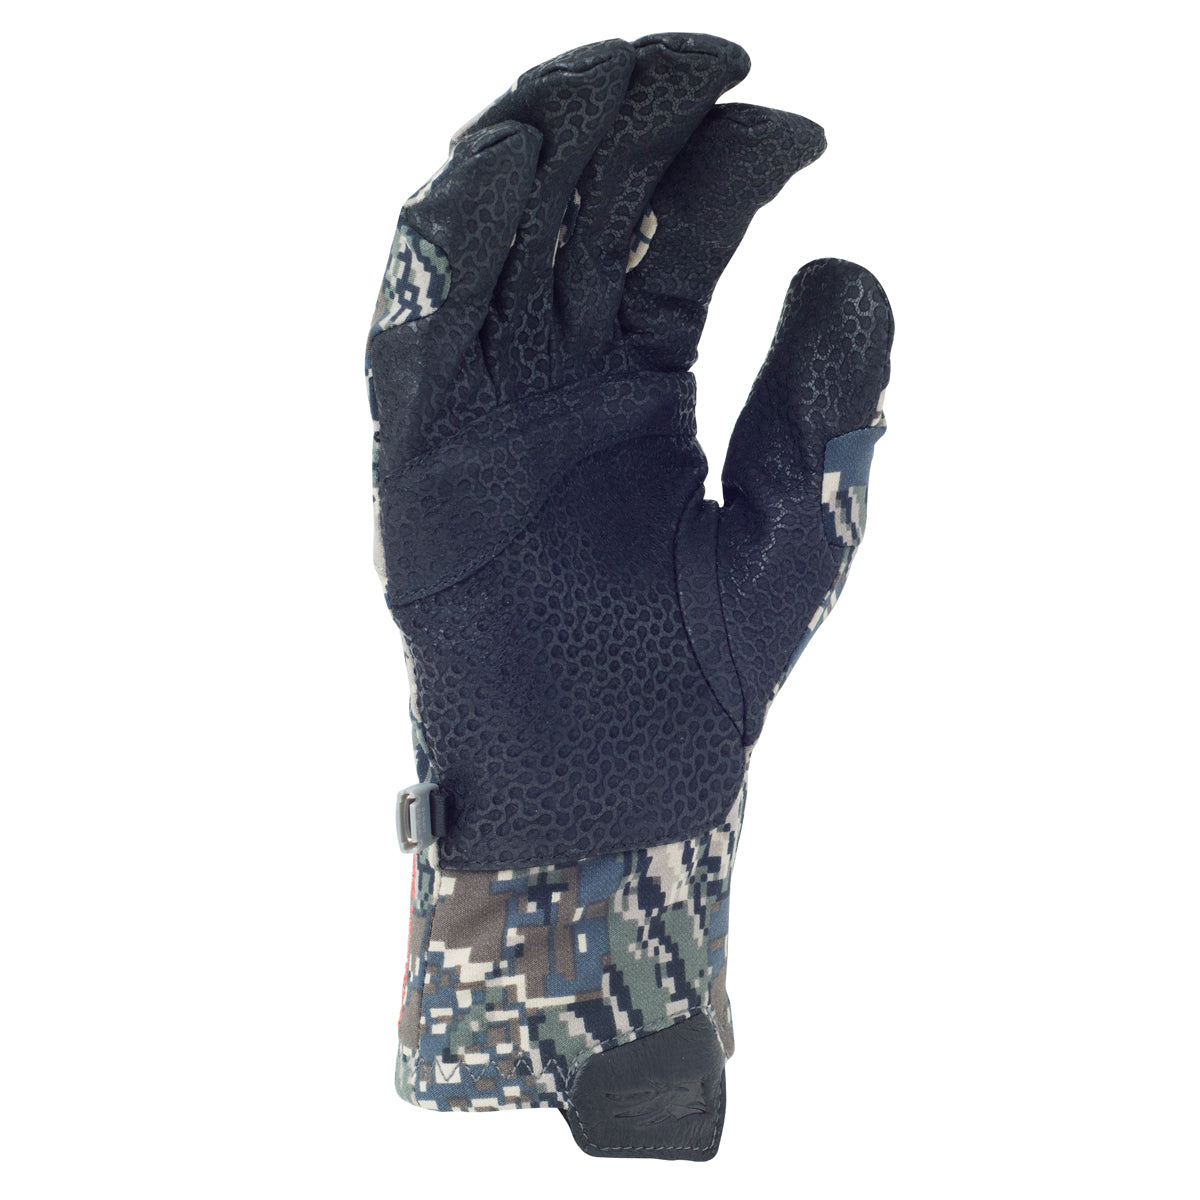 Sitka Mountain Glove by Sitka | Apparel - goHUNT Shop